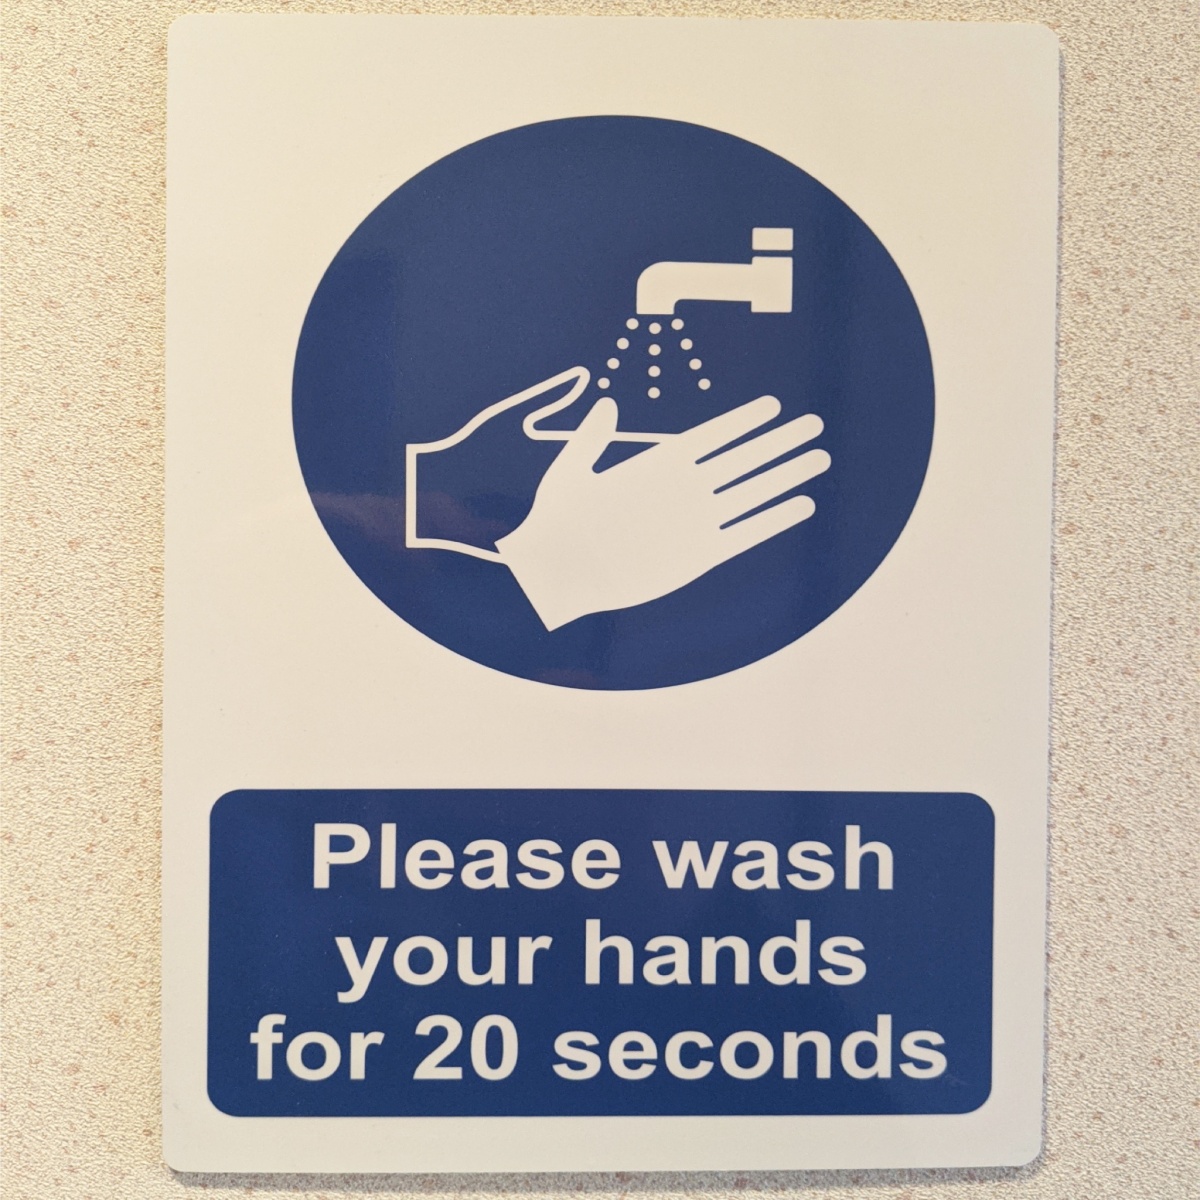 hygiene sign advising people of the most efficient way to wash their hands